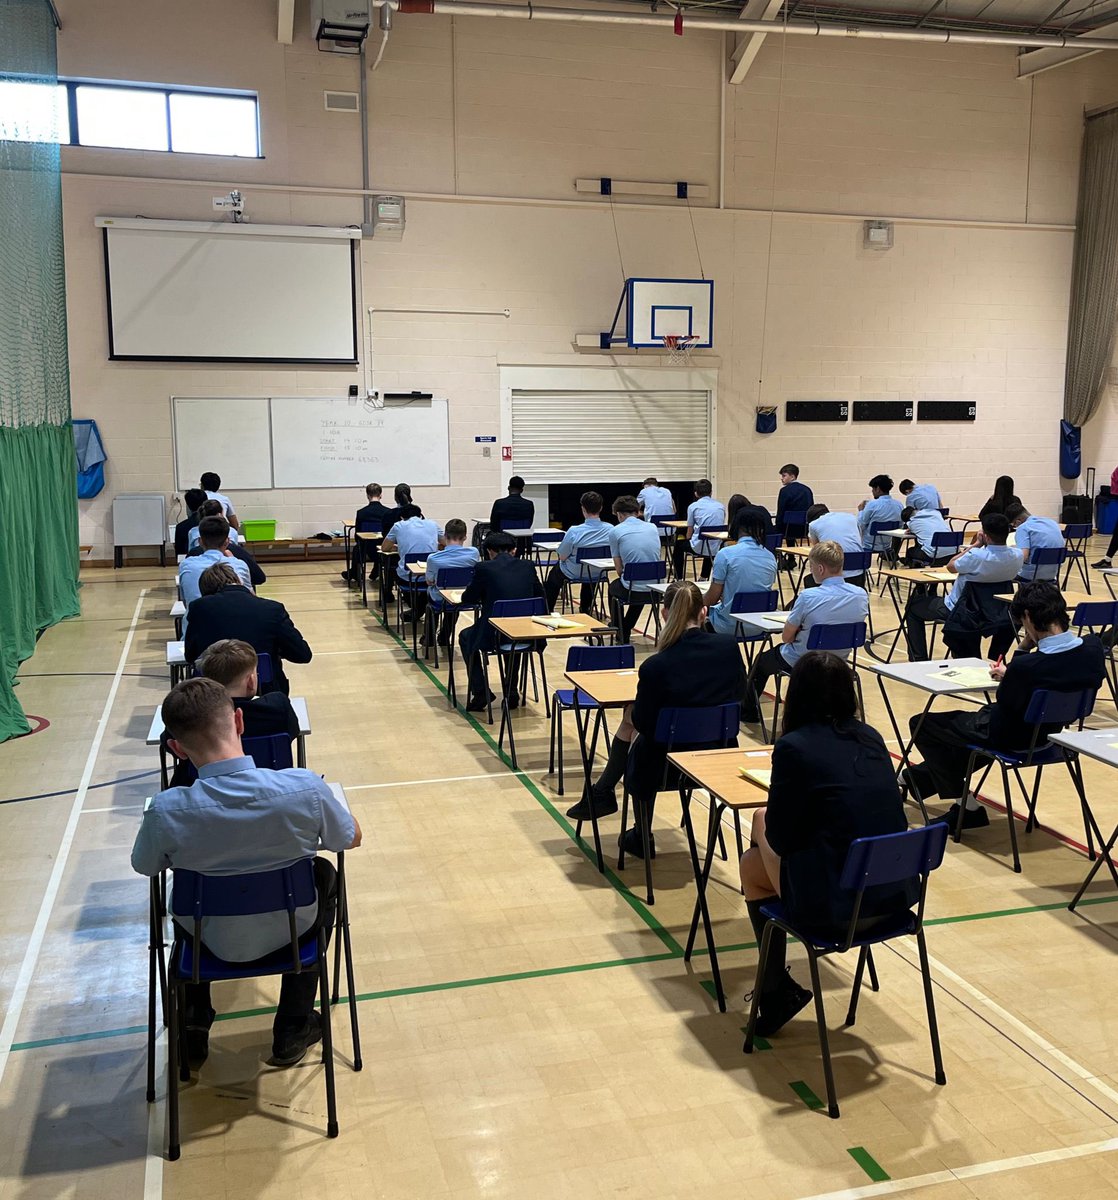 Year 10 GCSE PE pupils applying their knowledge and understanding in their assessment this afternoon. Opportunity to check their progress and learning! #StriveForSuccess #PracticeMakesProgress #Joesfamily